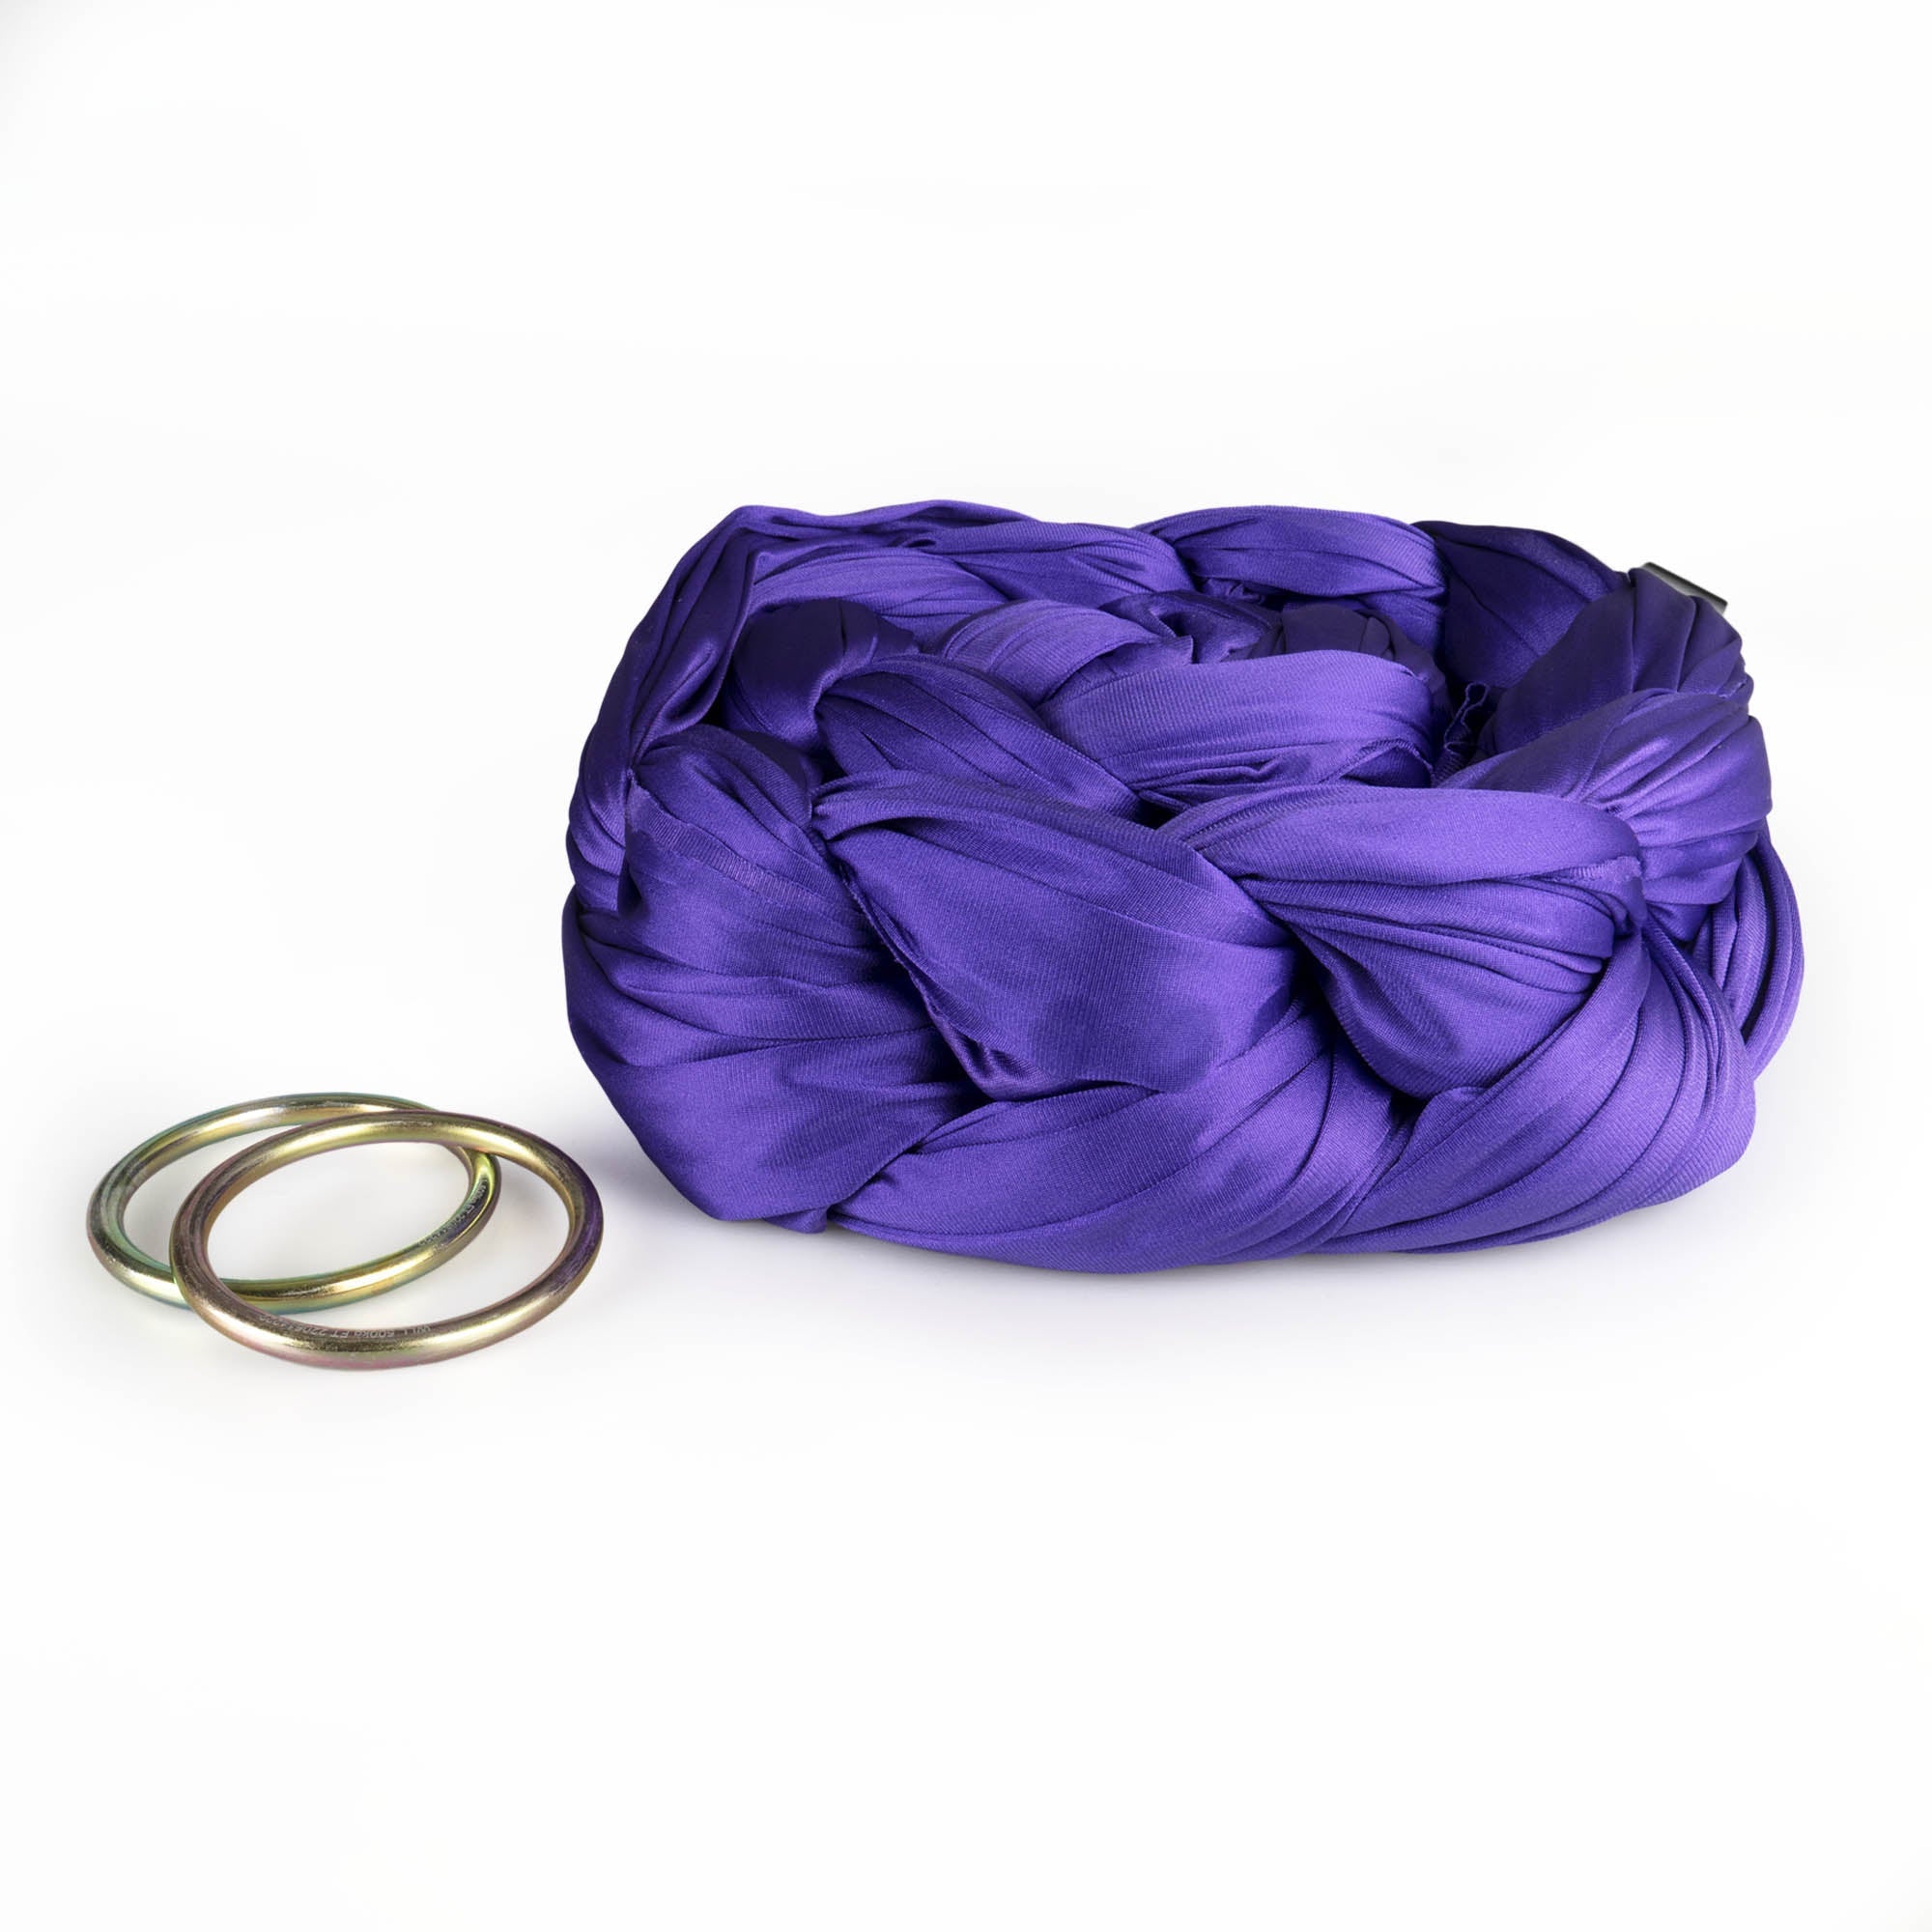 Prodigy 6m purple aerial yoga hammock daisy chained with rings